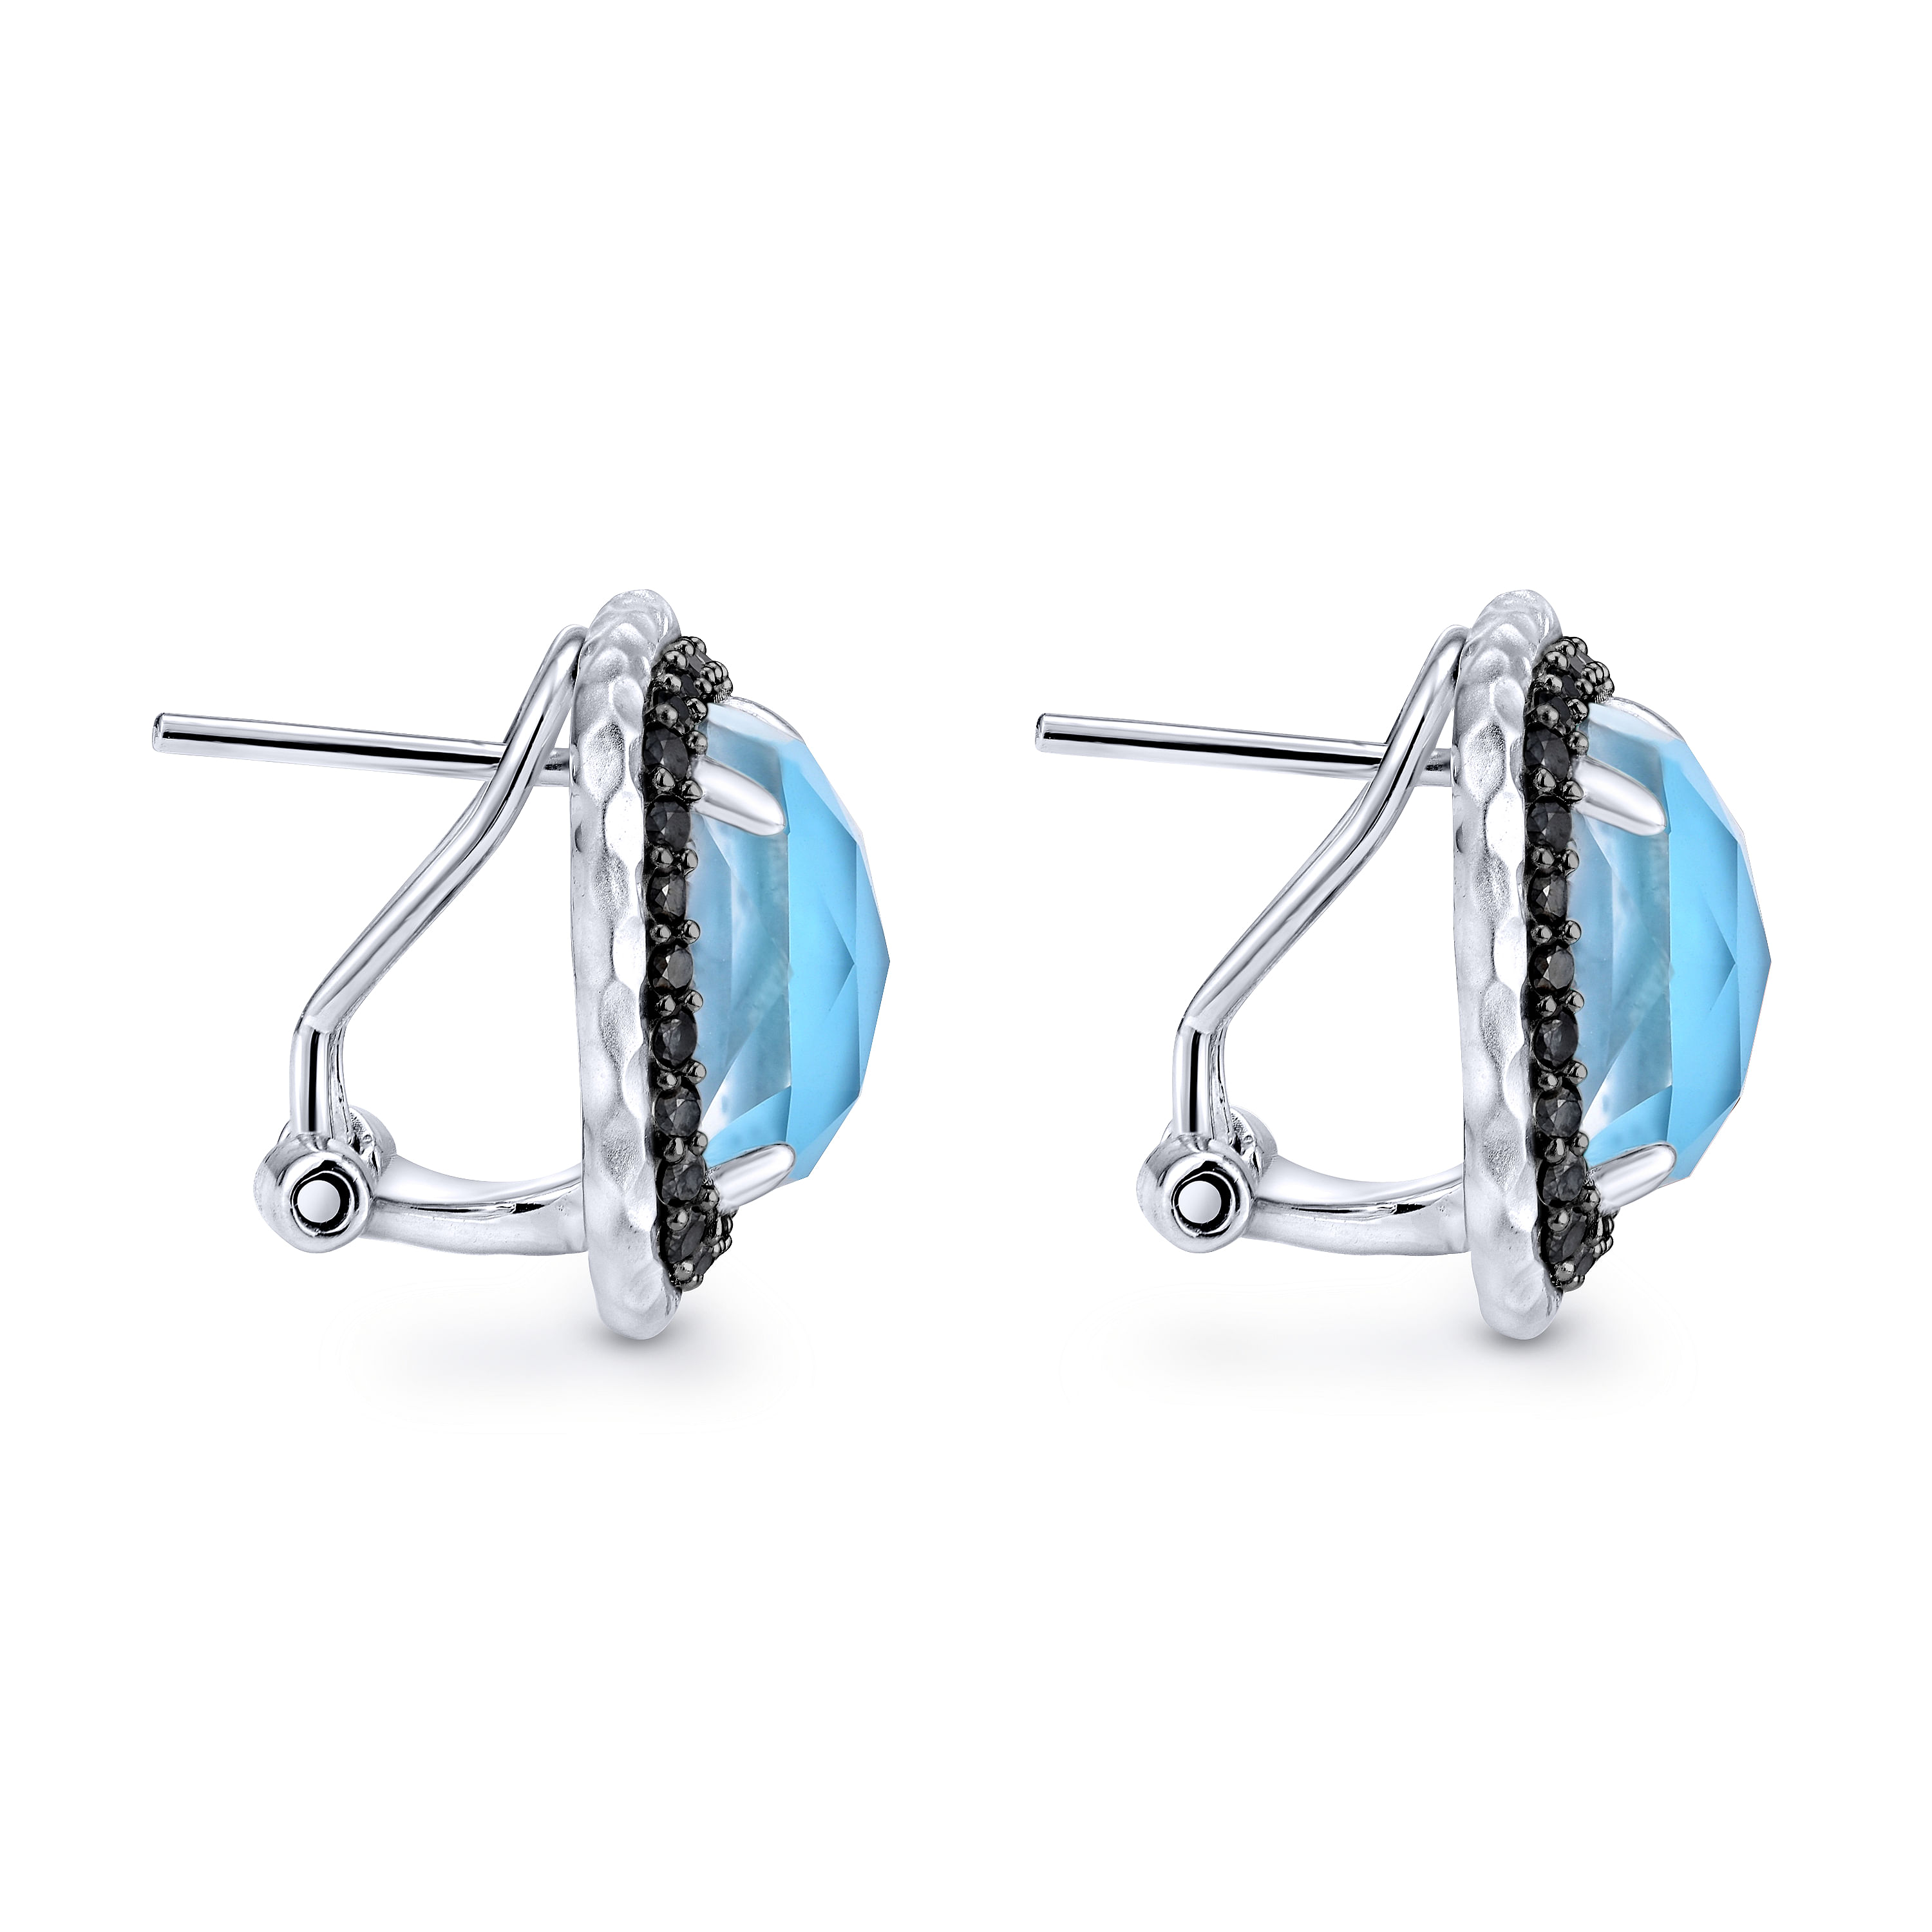 925 Sterling Silver Rock Crystal/Turquoise with Black Spinel Halo Stud Earrings